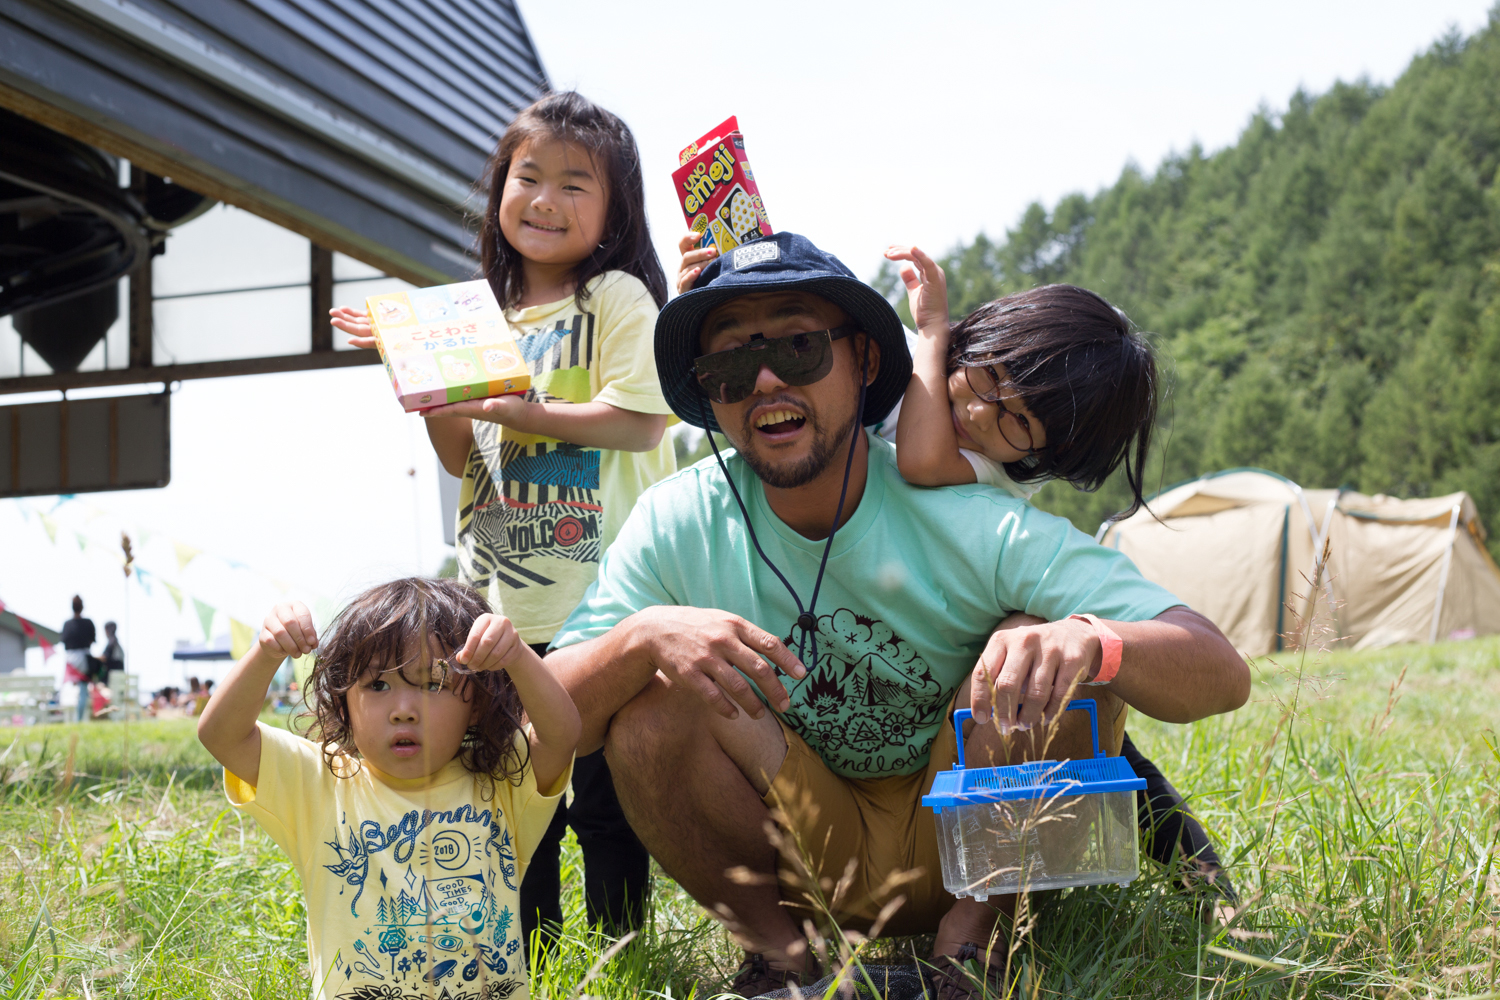 Mr. Yanagisawa I came from Niigata for the first time by being invited by a friend.The scale is compact and close, and it's okay to be loose overall.I usually snowboard and came with my fellow family members.Also in the picture are my daughter and fellow children.